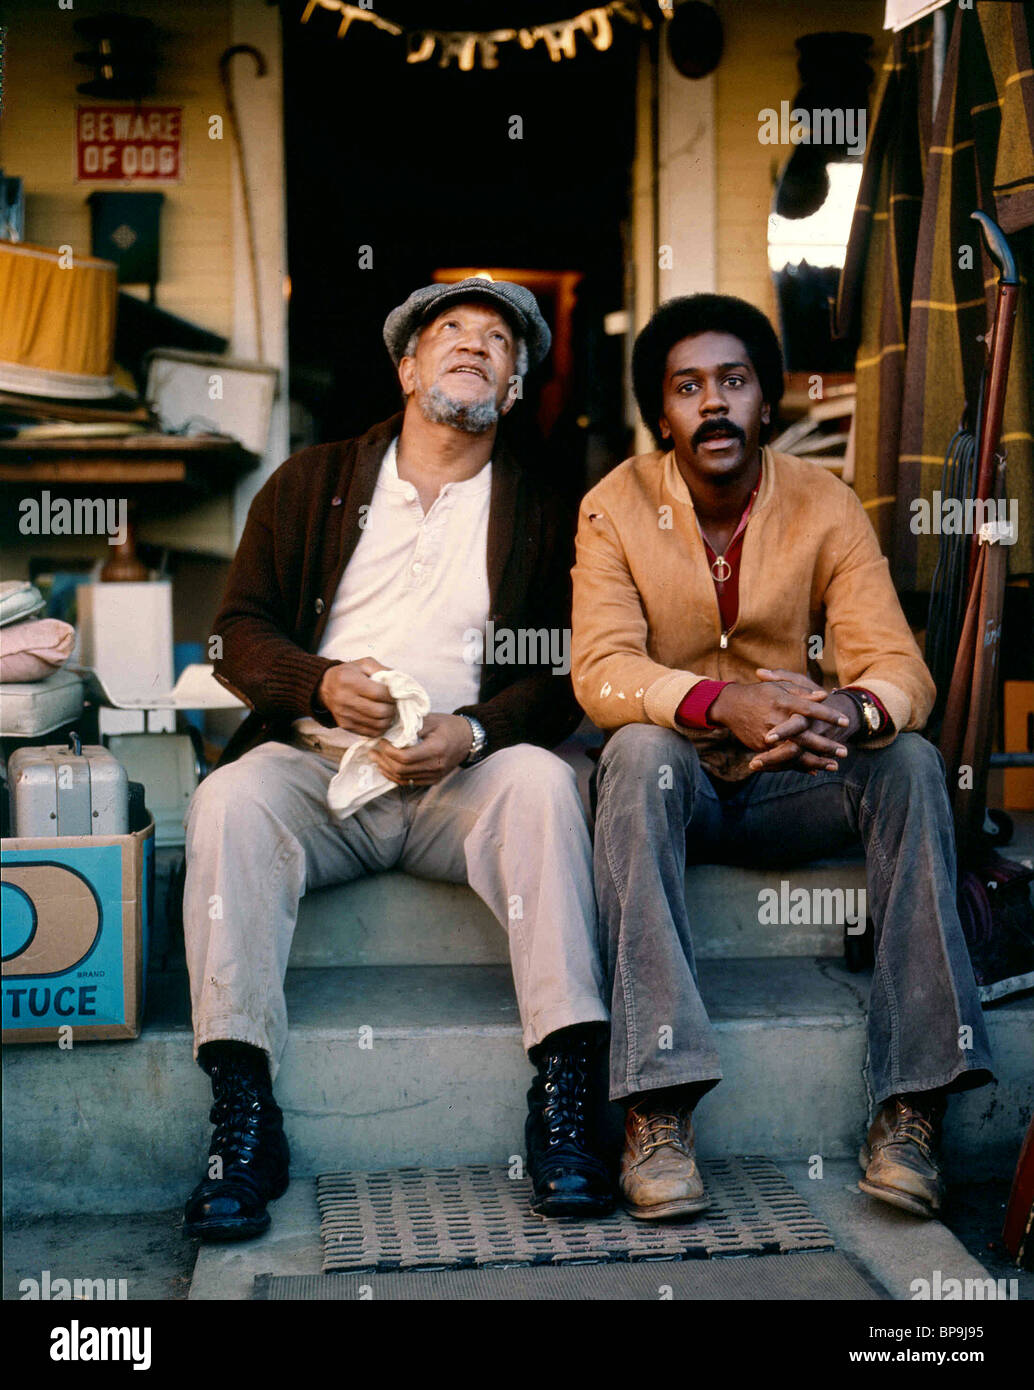 Sanford And Son Stock Photos & Sanford And Son Stock Images - Alamy1034 x 1390